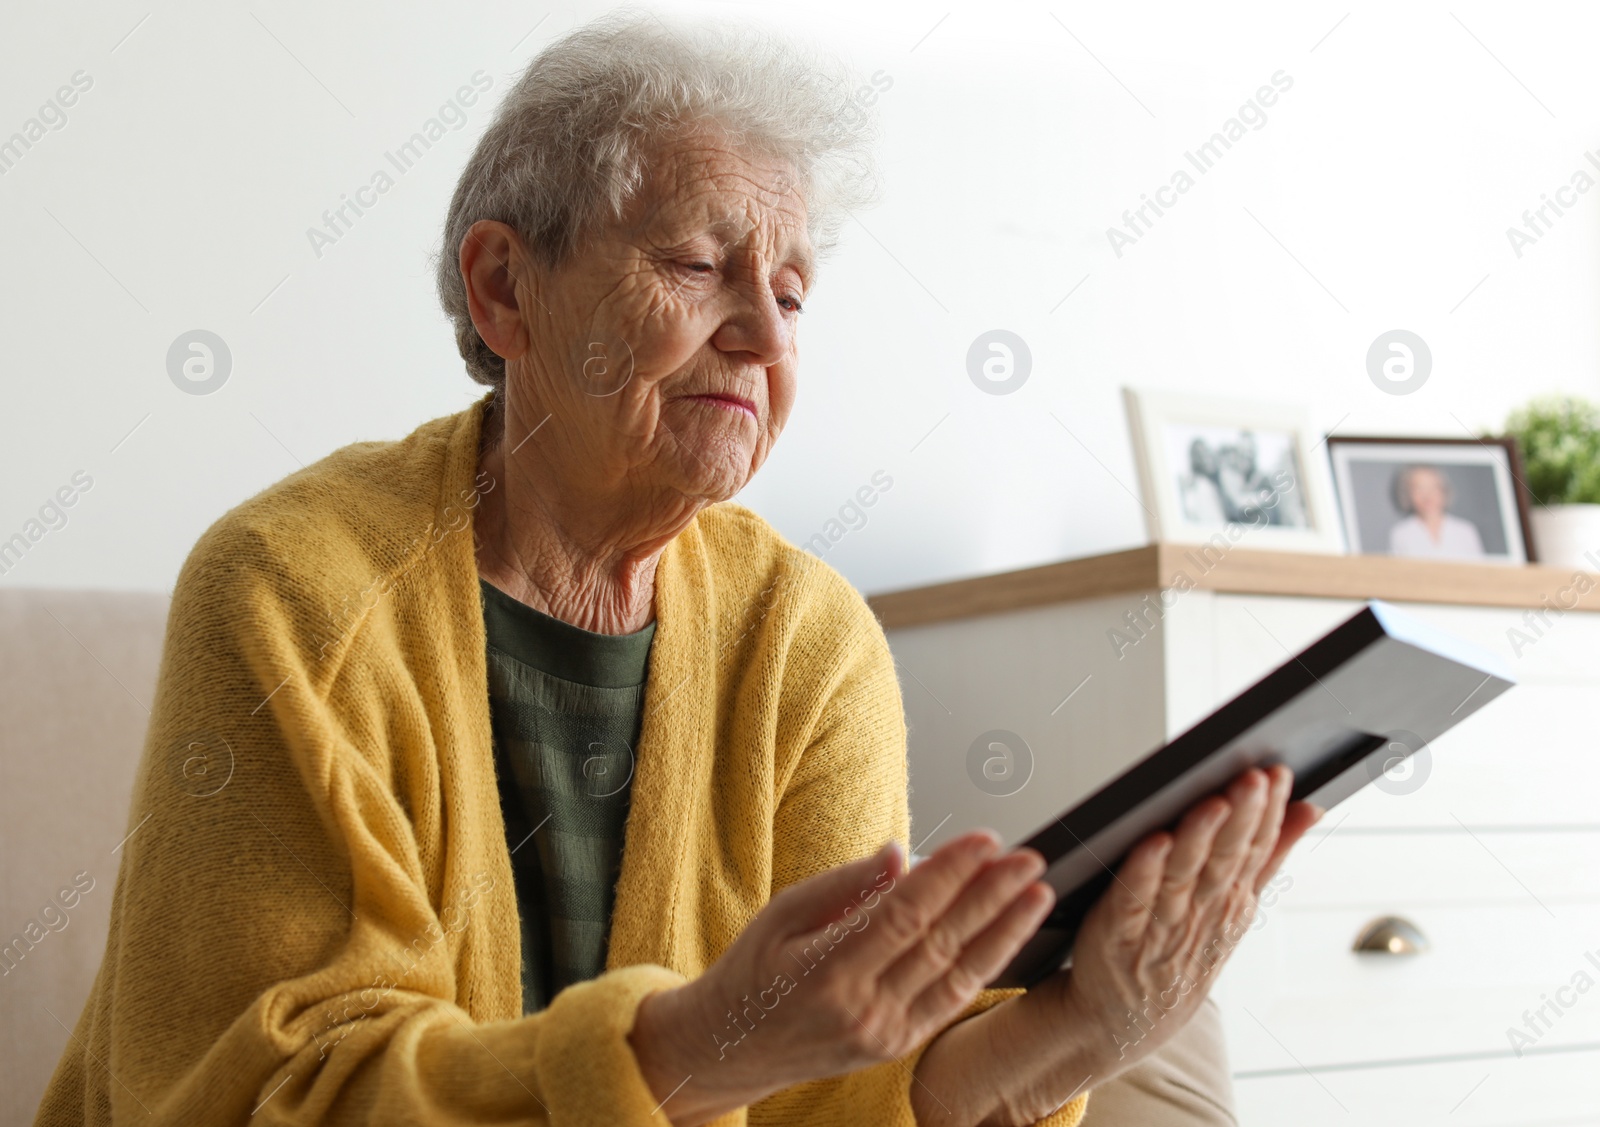 Photo of Elderly woman with framed photo on sofa at home